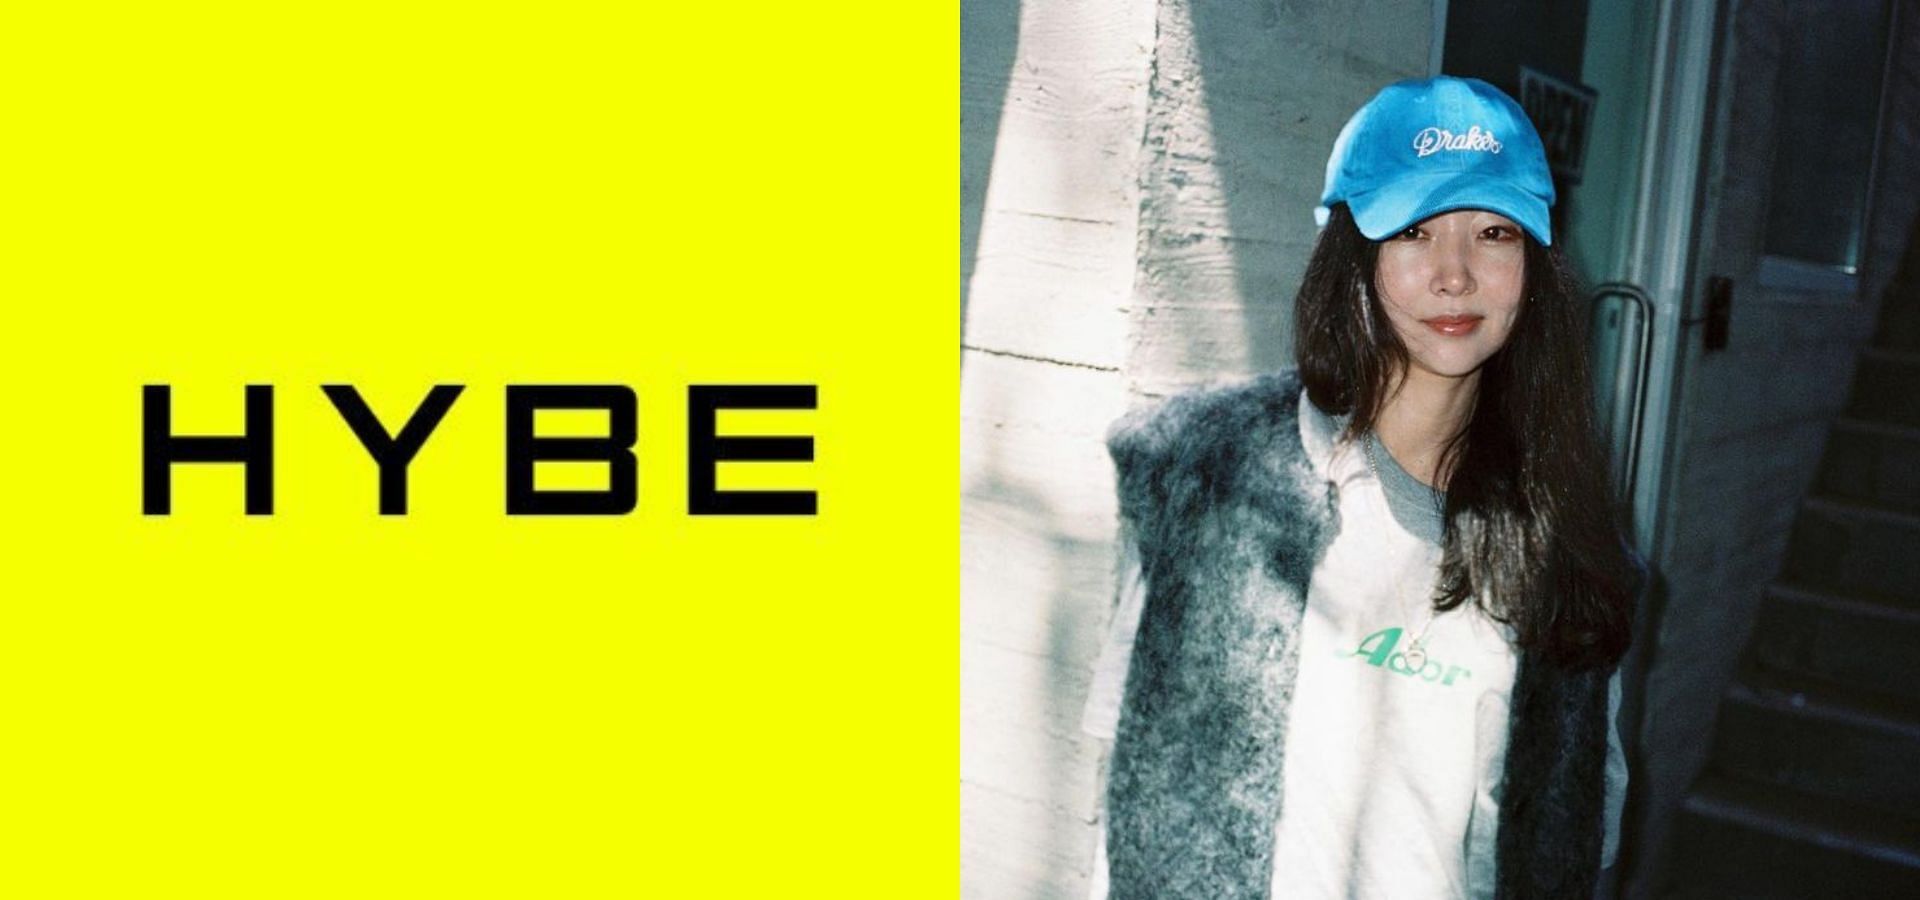 HYBE reportedly faces an 850B KRW loss amid ongoing conflict with ADOR&rsquo;s CEO Min Hee-jin (Images Via X/@hybeofficialtwt, Instagram/@min.hee.jin) 